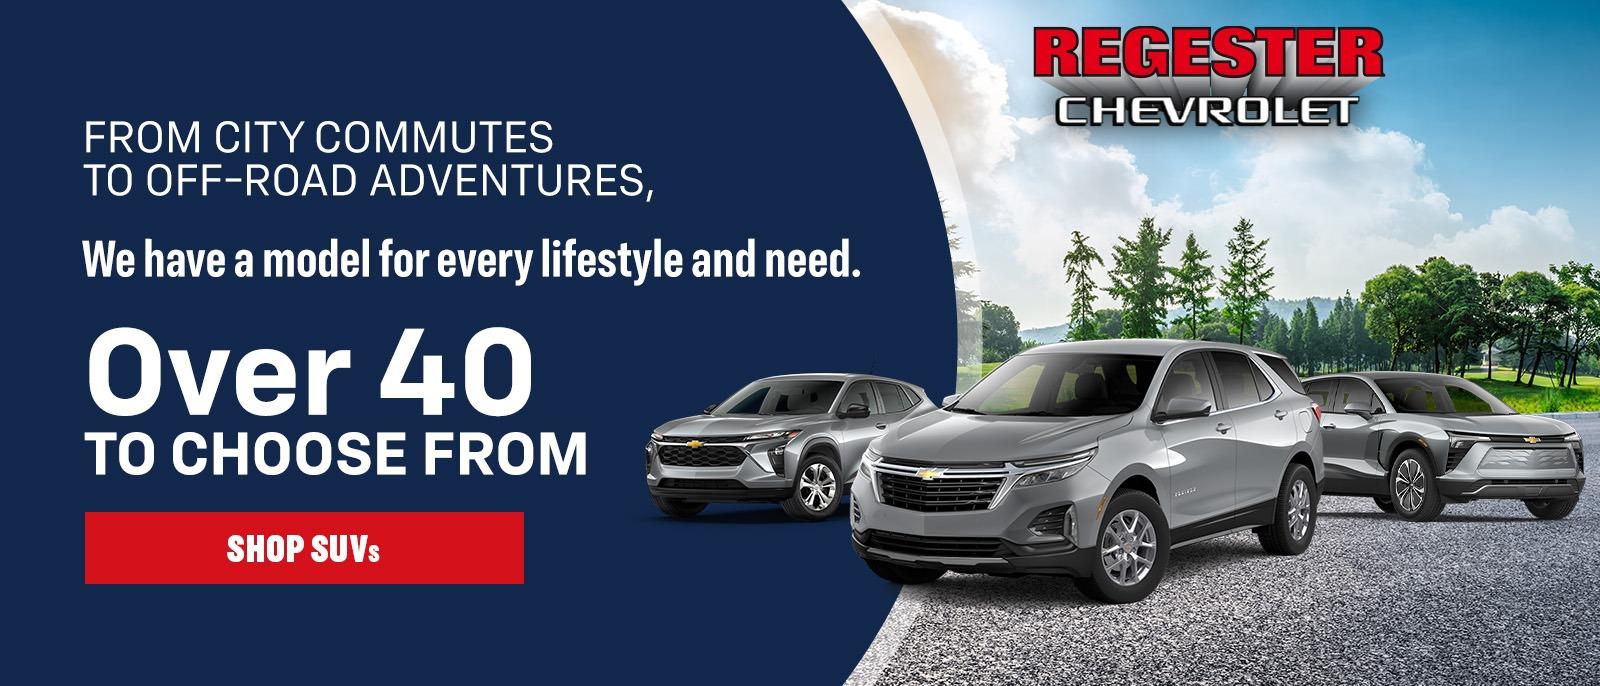 Shop wide selection of SUVs at Regester Chevrolet